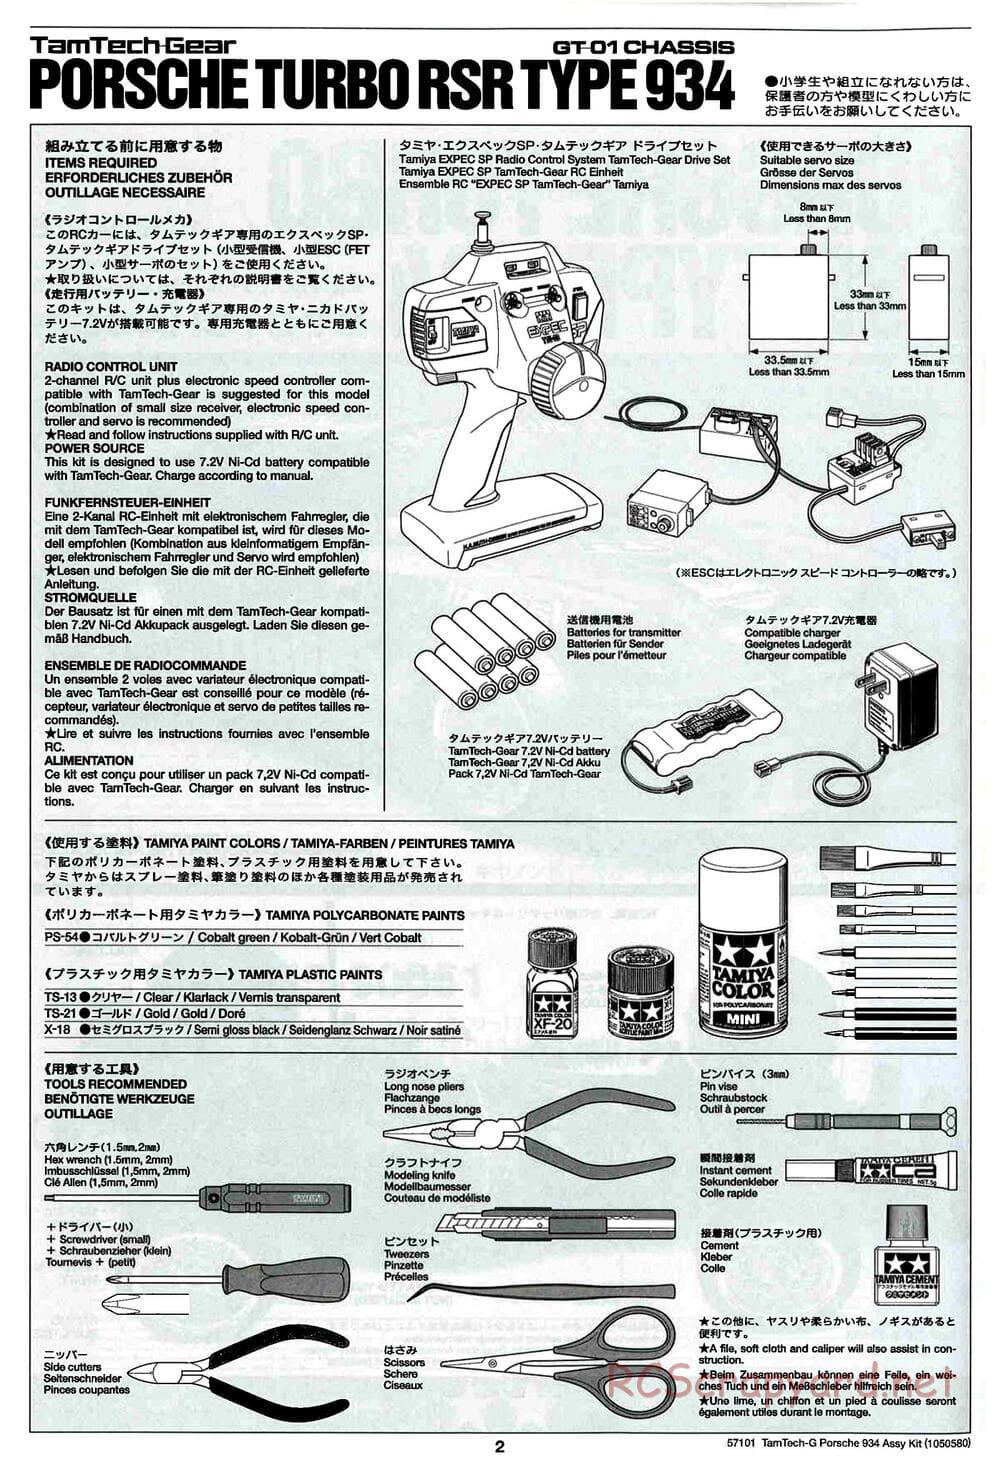 Tamiya - Porsche Turbo RSR - GT-01 Chassis - Manual - Page 2